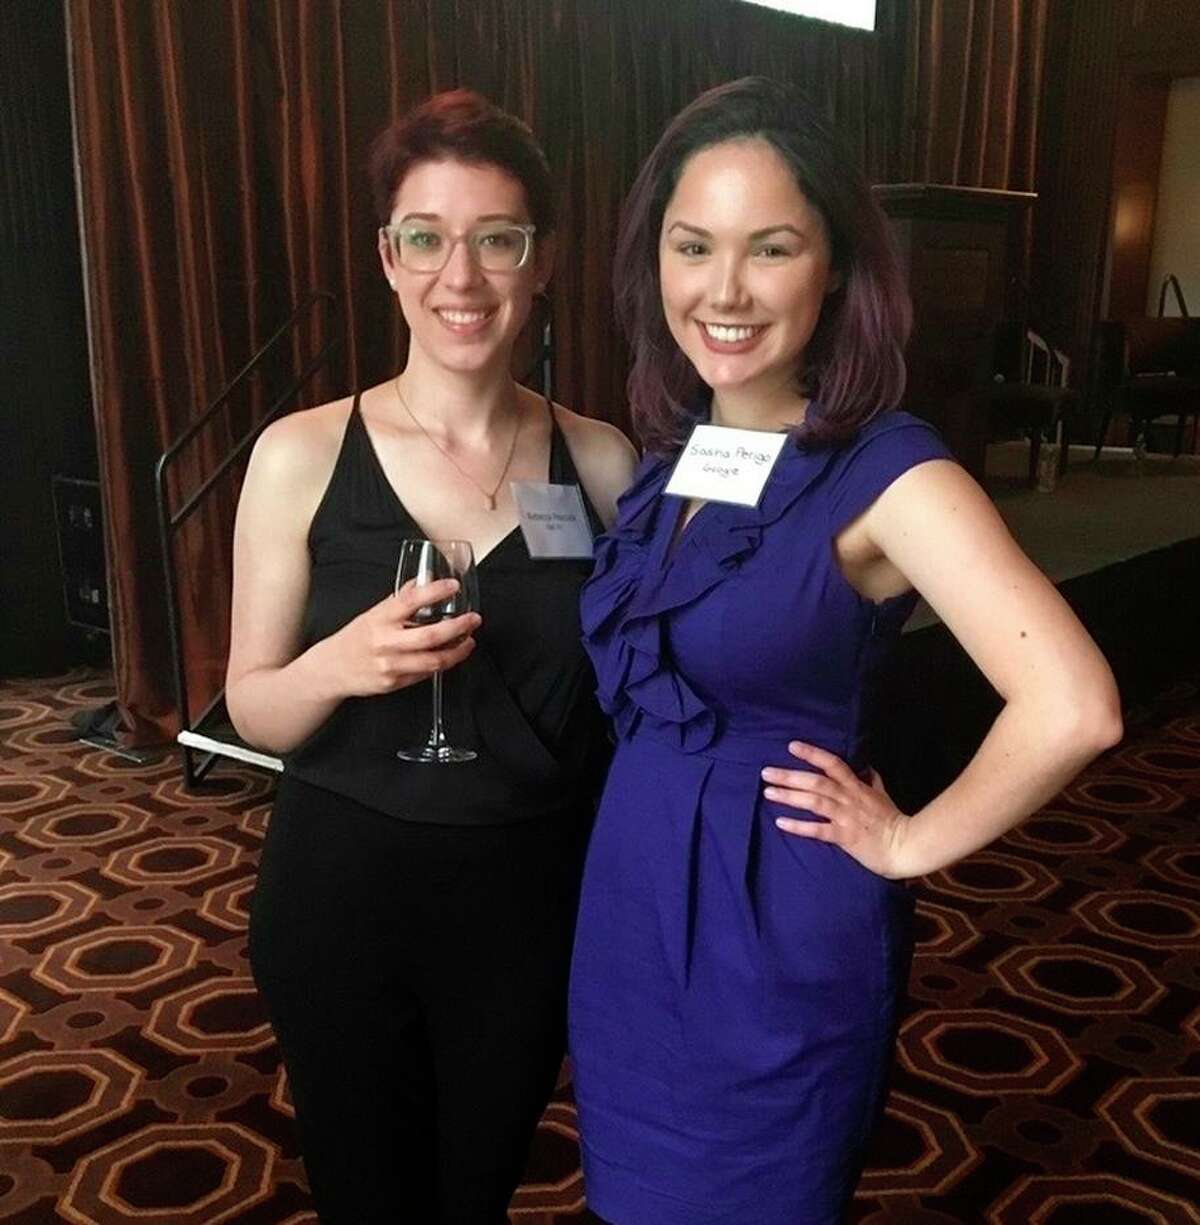 Tenant rights advocate Sasha Perigo (right), shown with friend Rebecca Peacock, says Jon Jacobo sexually assaulted her.